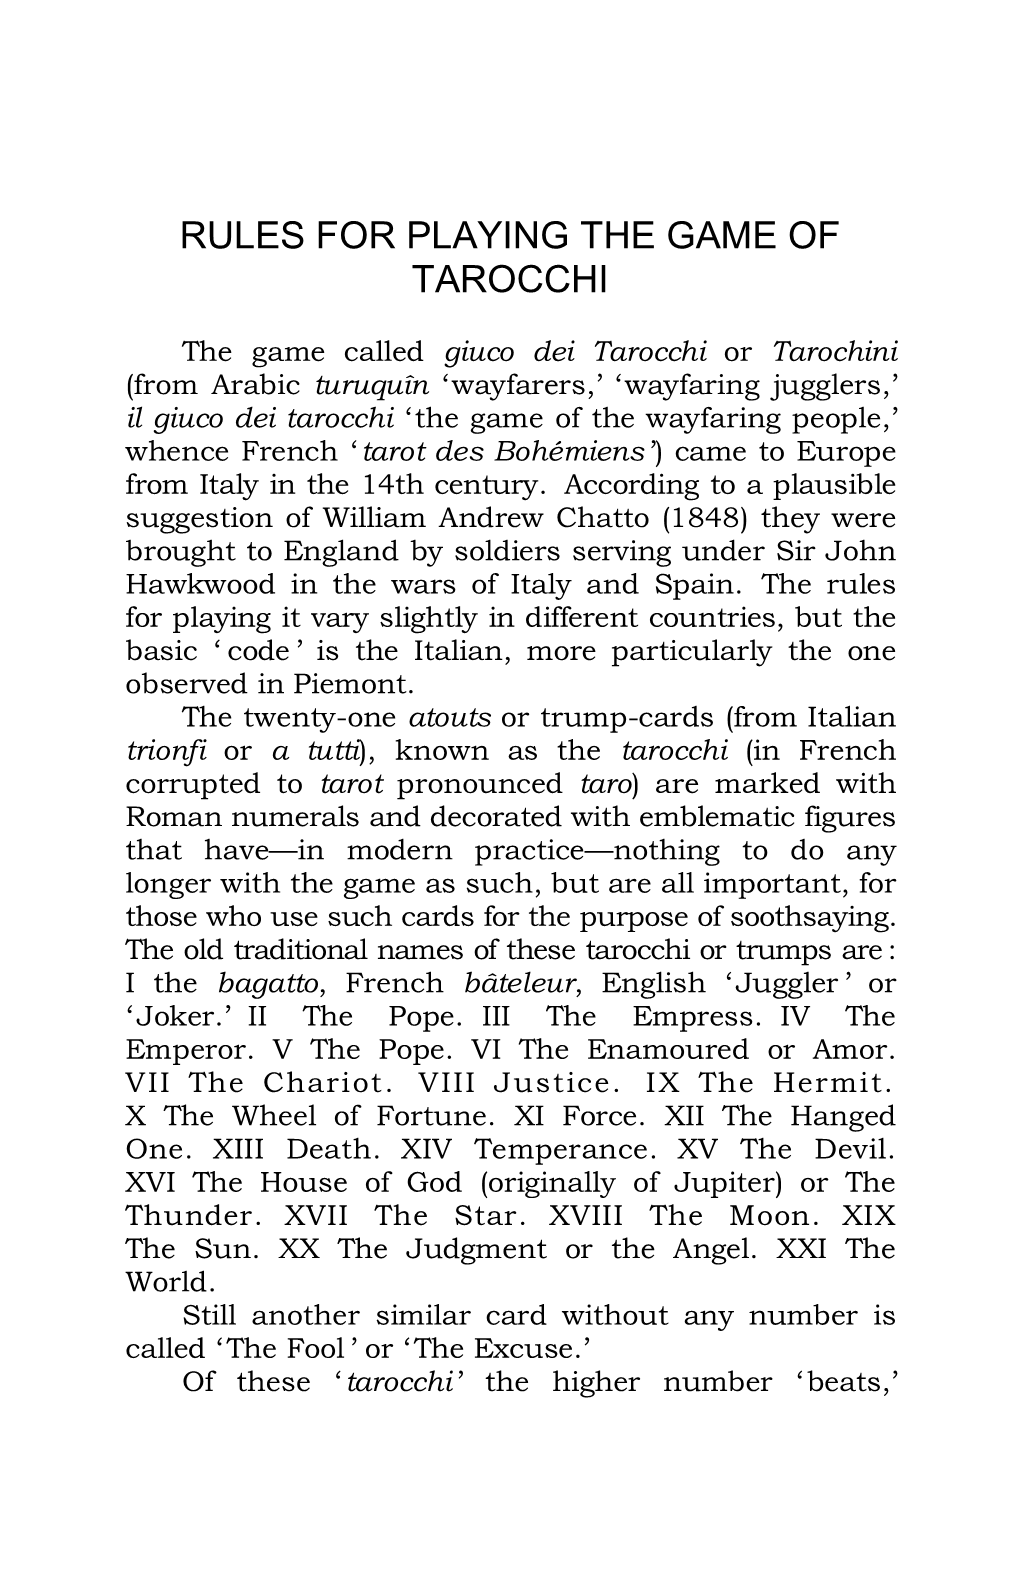 Rules for Playing the Game of Tarocchi